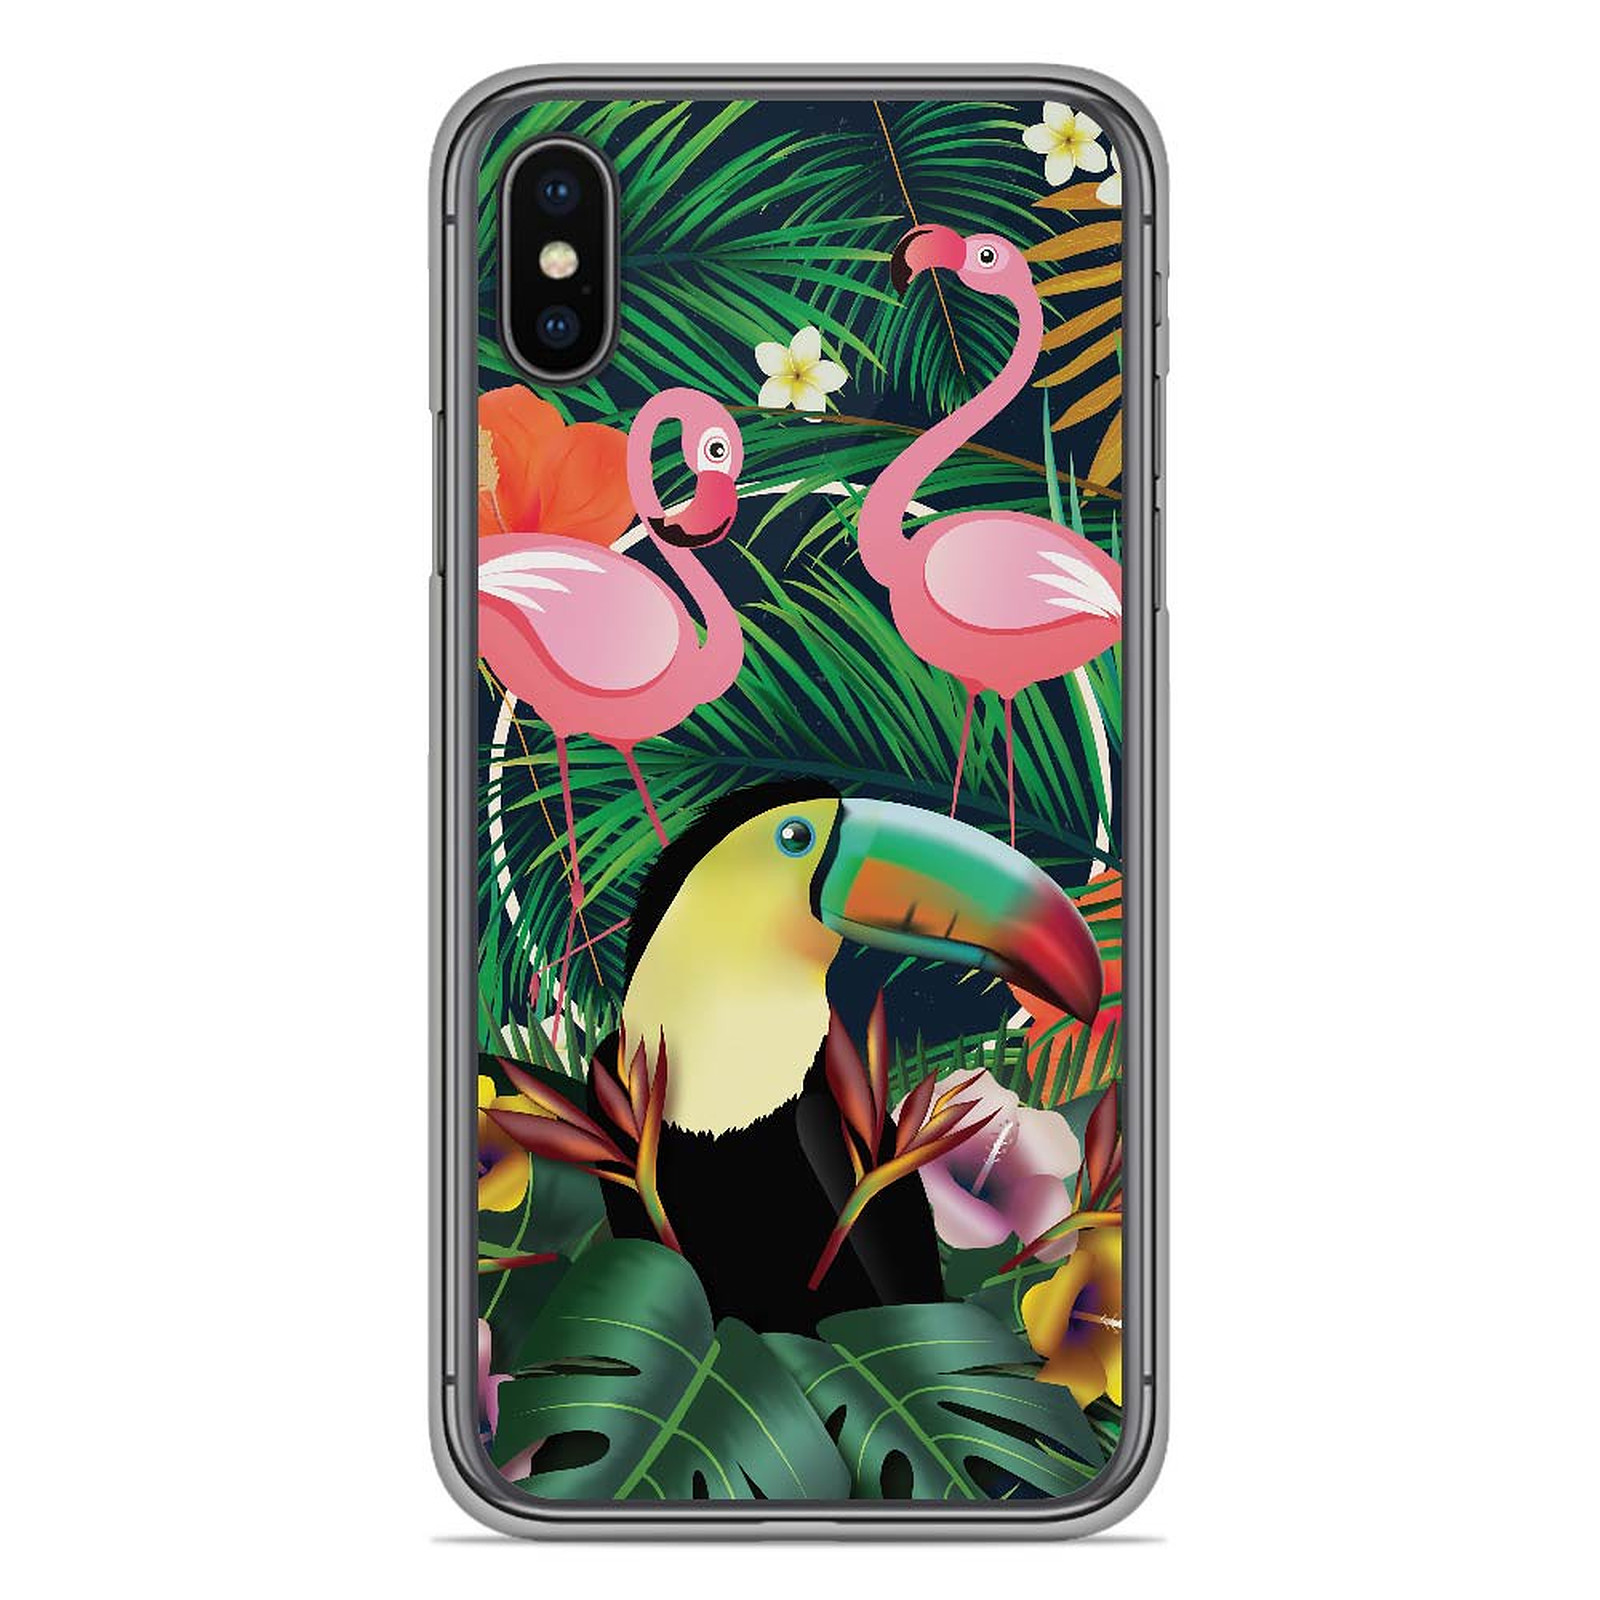 1001 Coques Coque silicone gel Apple iPhone X motif Tropical Toucan - Coque telephone 1001Coques